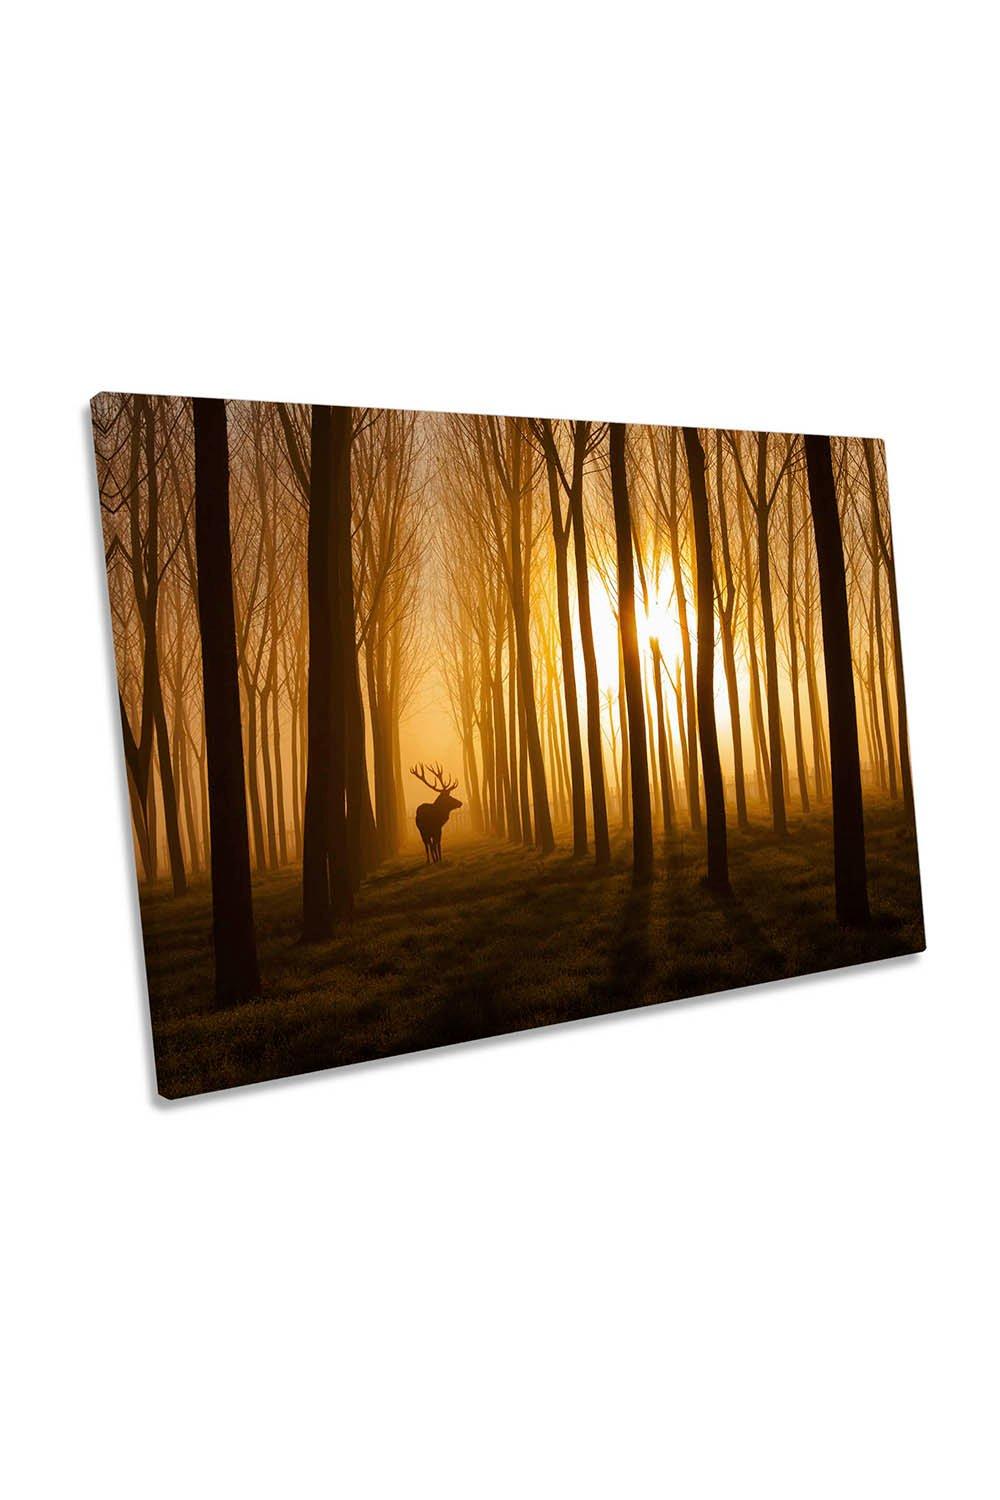 Once Upon a Time Stag Deer Canvas Wall Art Picture Print